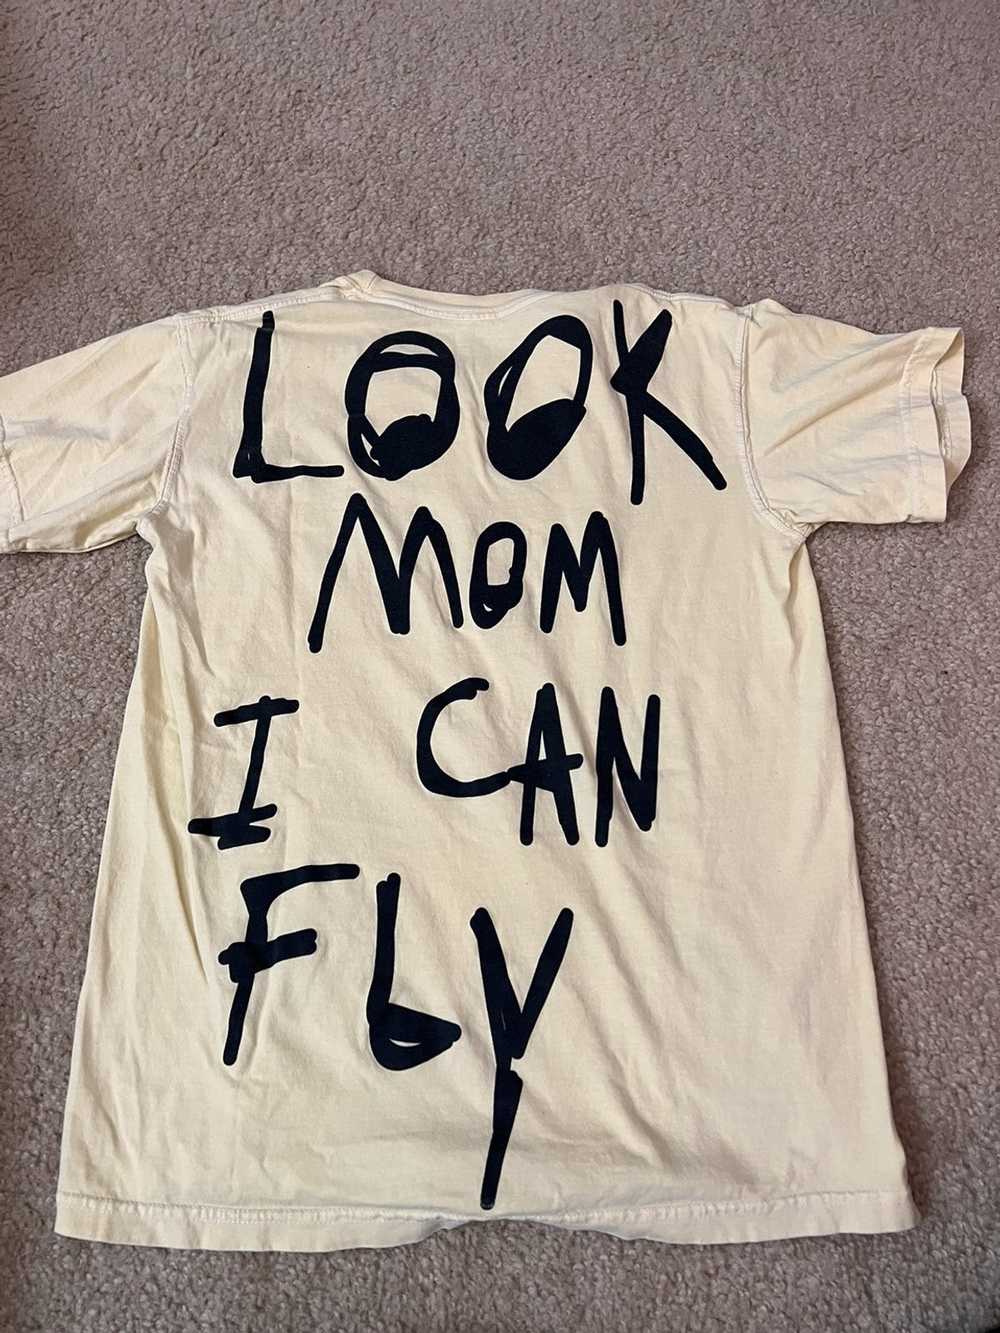 Travis Scott Look Mom I Can Fly Tee (Astroworld) - image 3